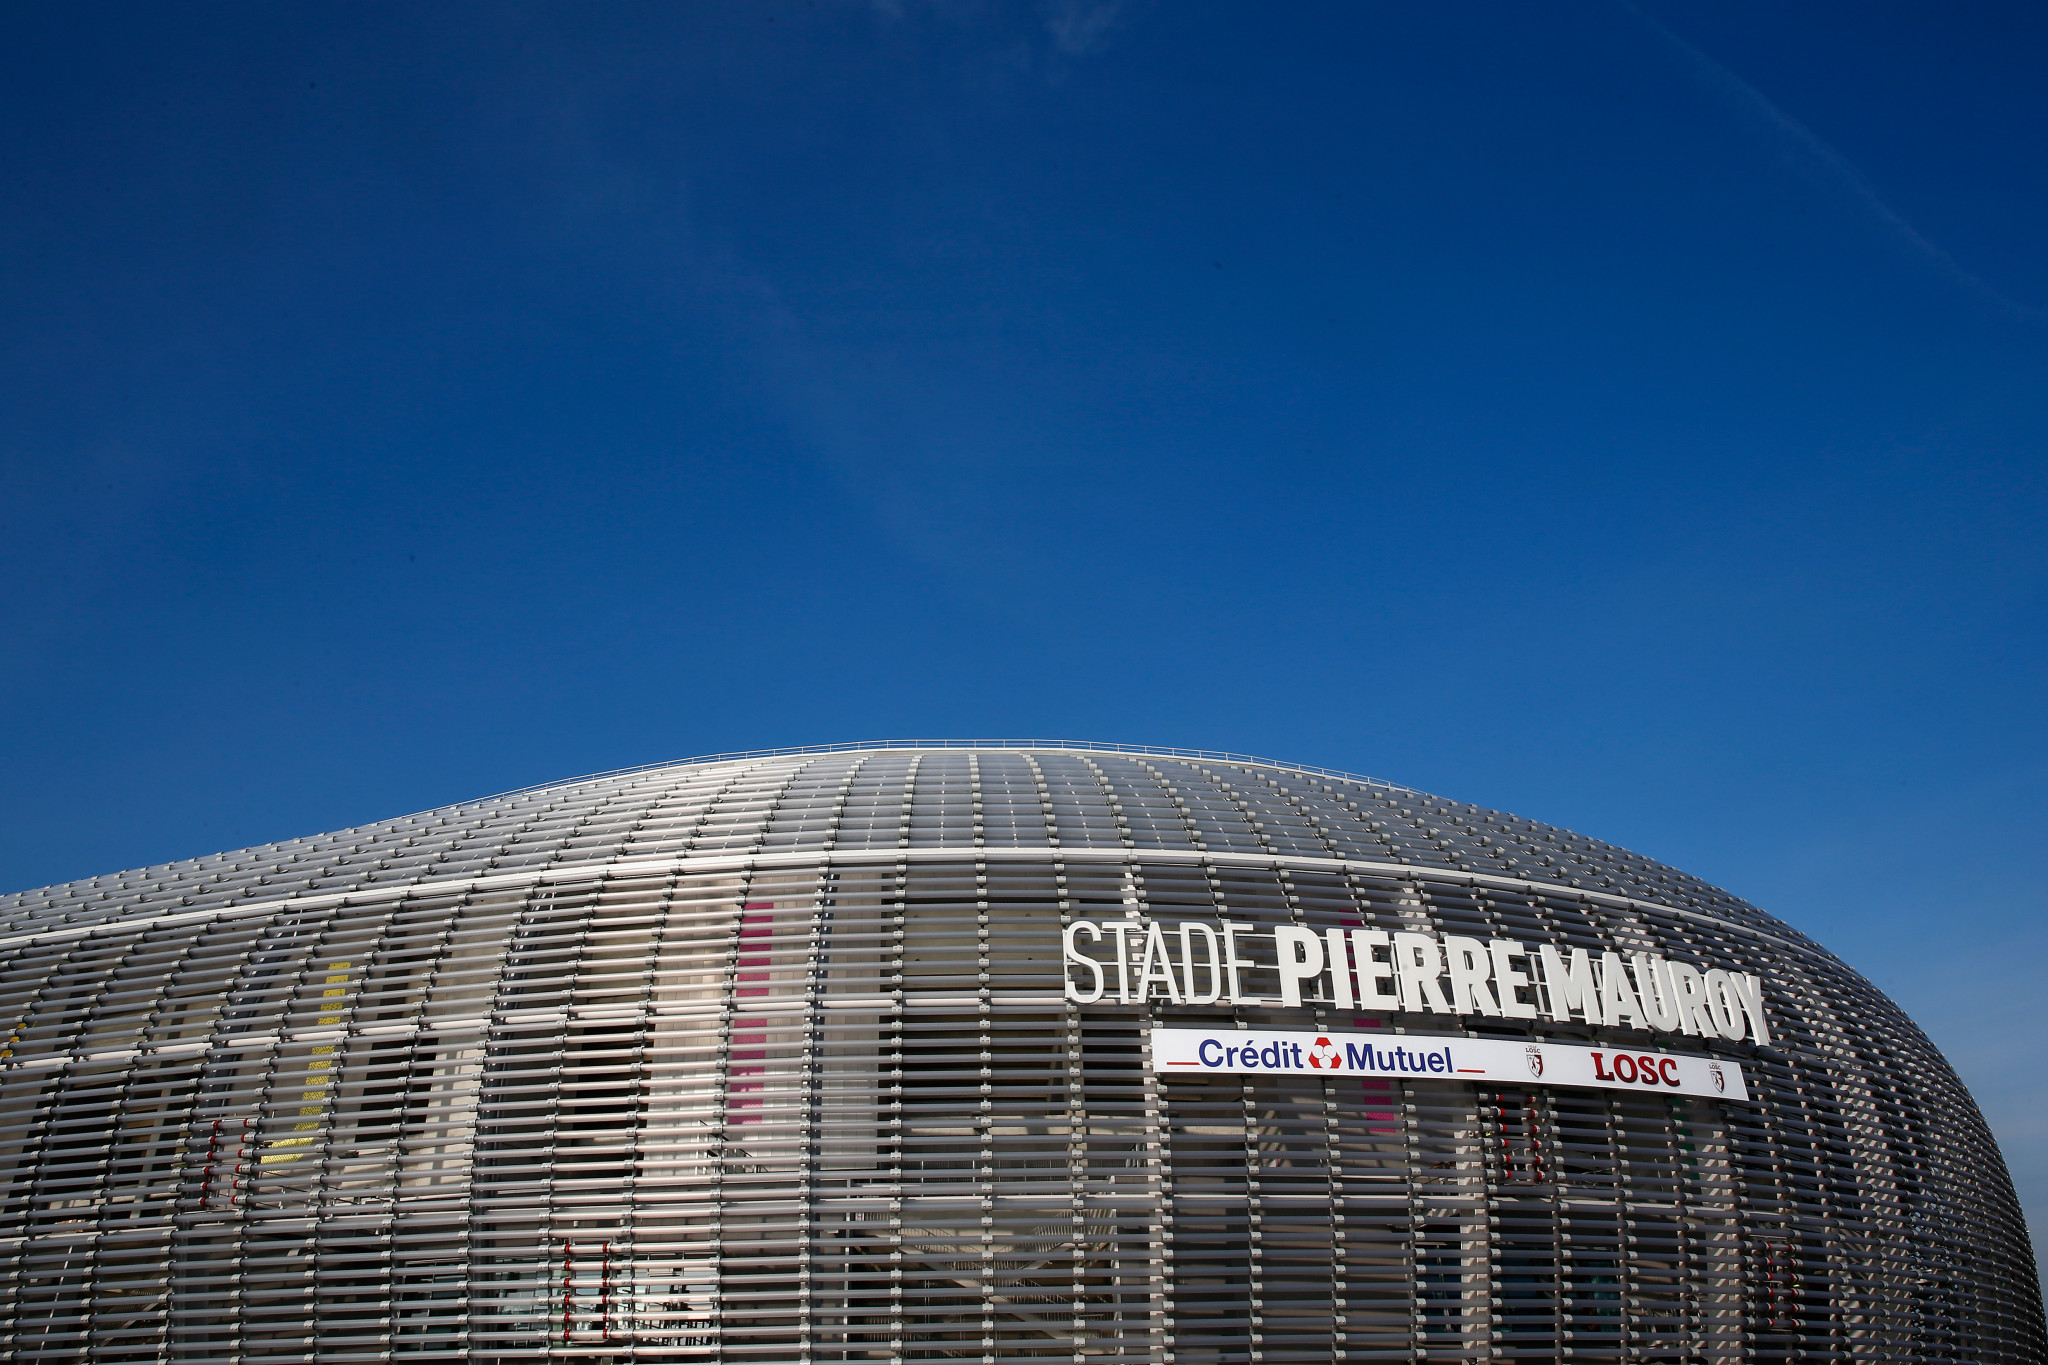 The Stade Pierre-Mauroy has been selected by Paris 2024 as the venue for the preliminary phase of the basketball events ©Getty Images